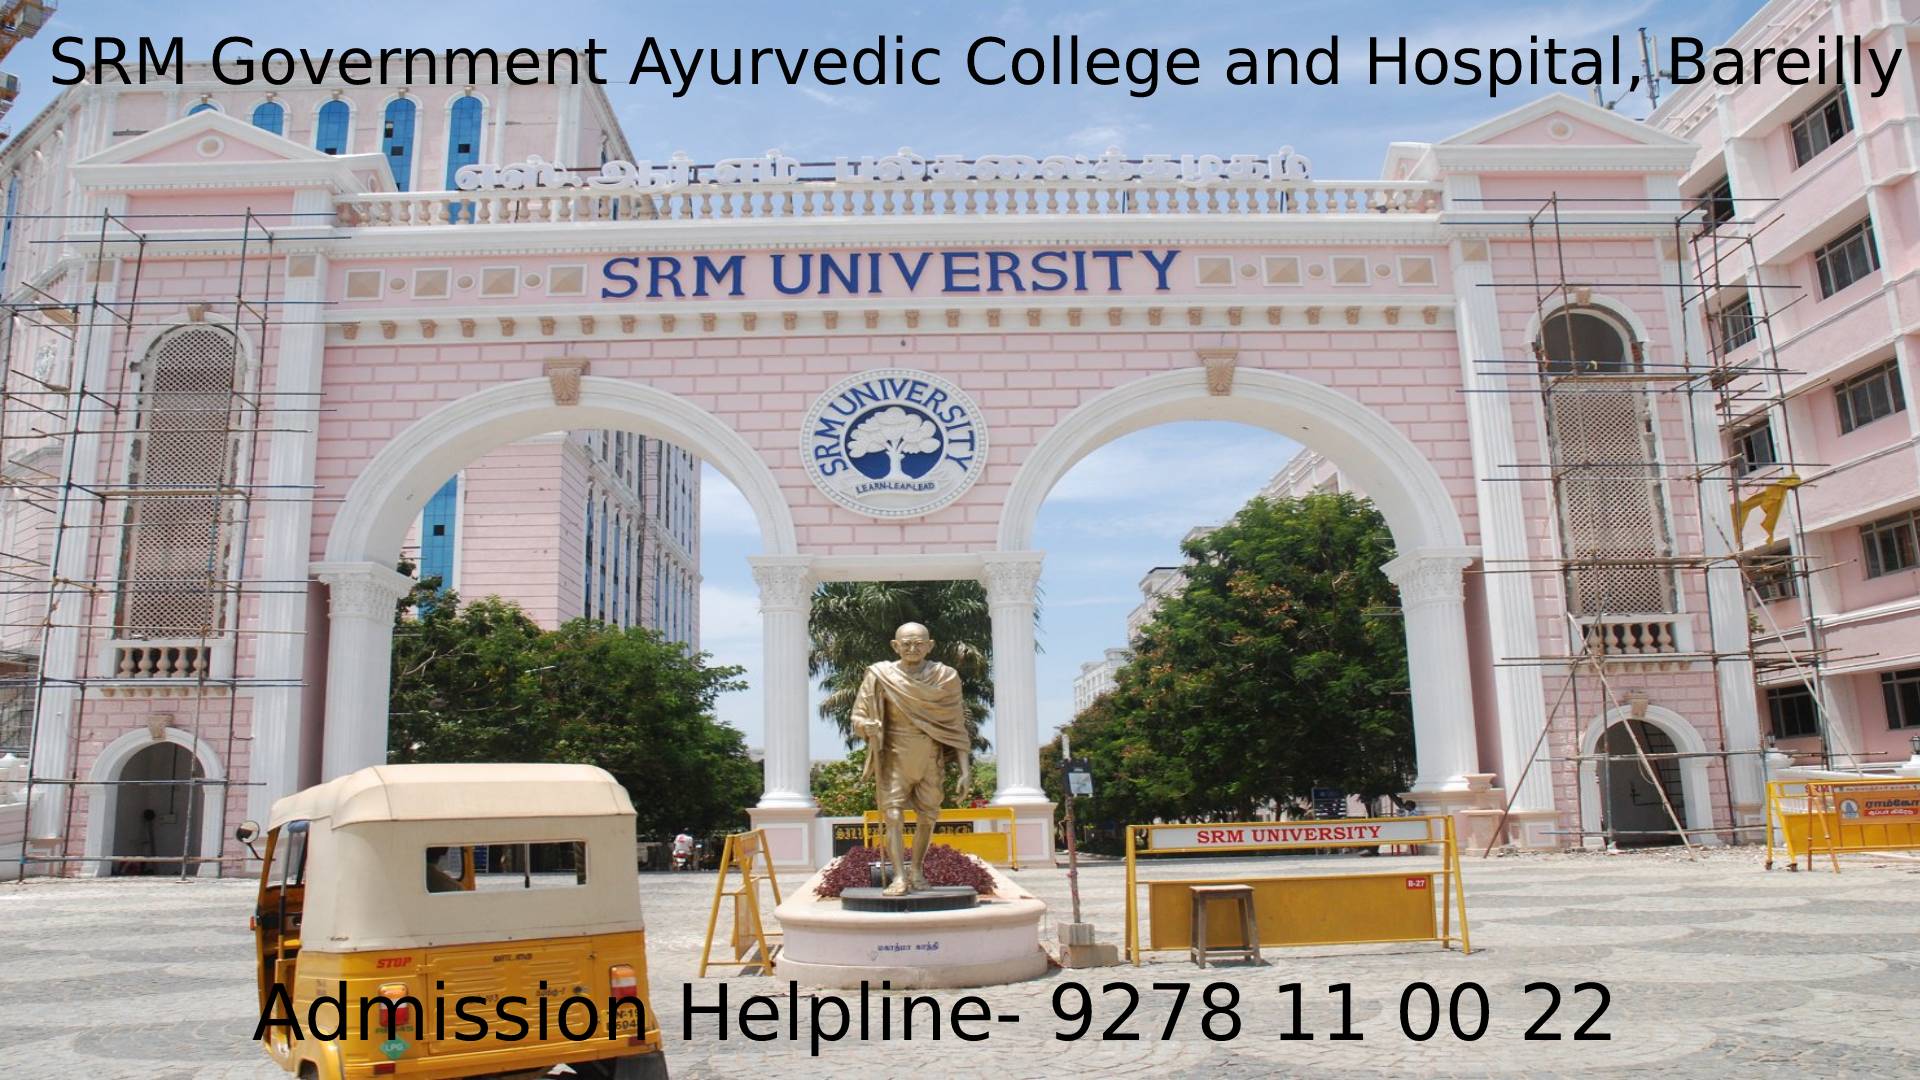 SRM Government Ayurvedic College and Hospital, Bareilly